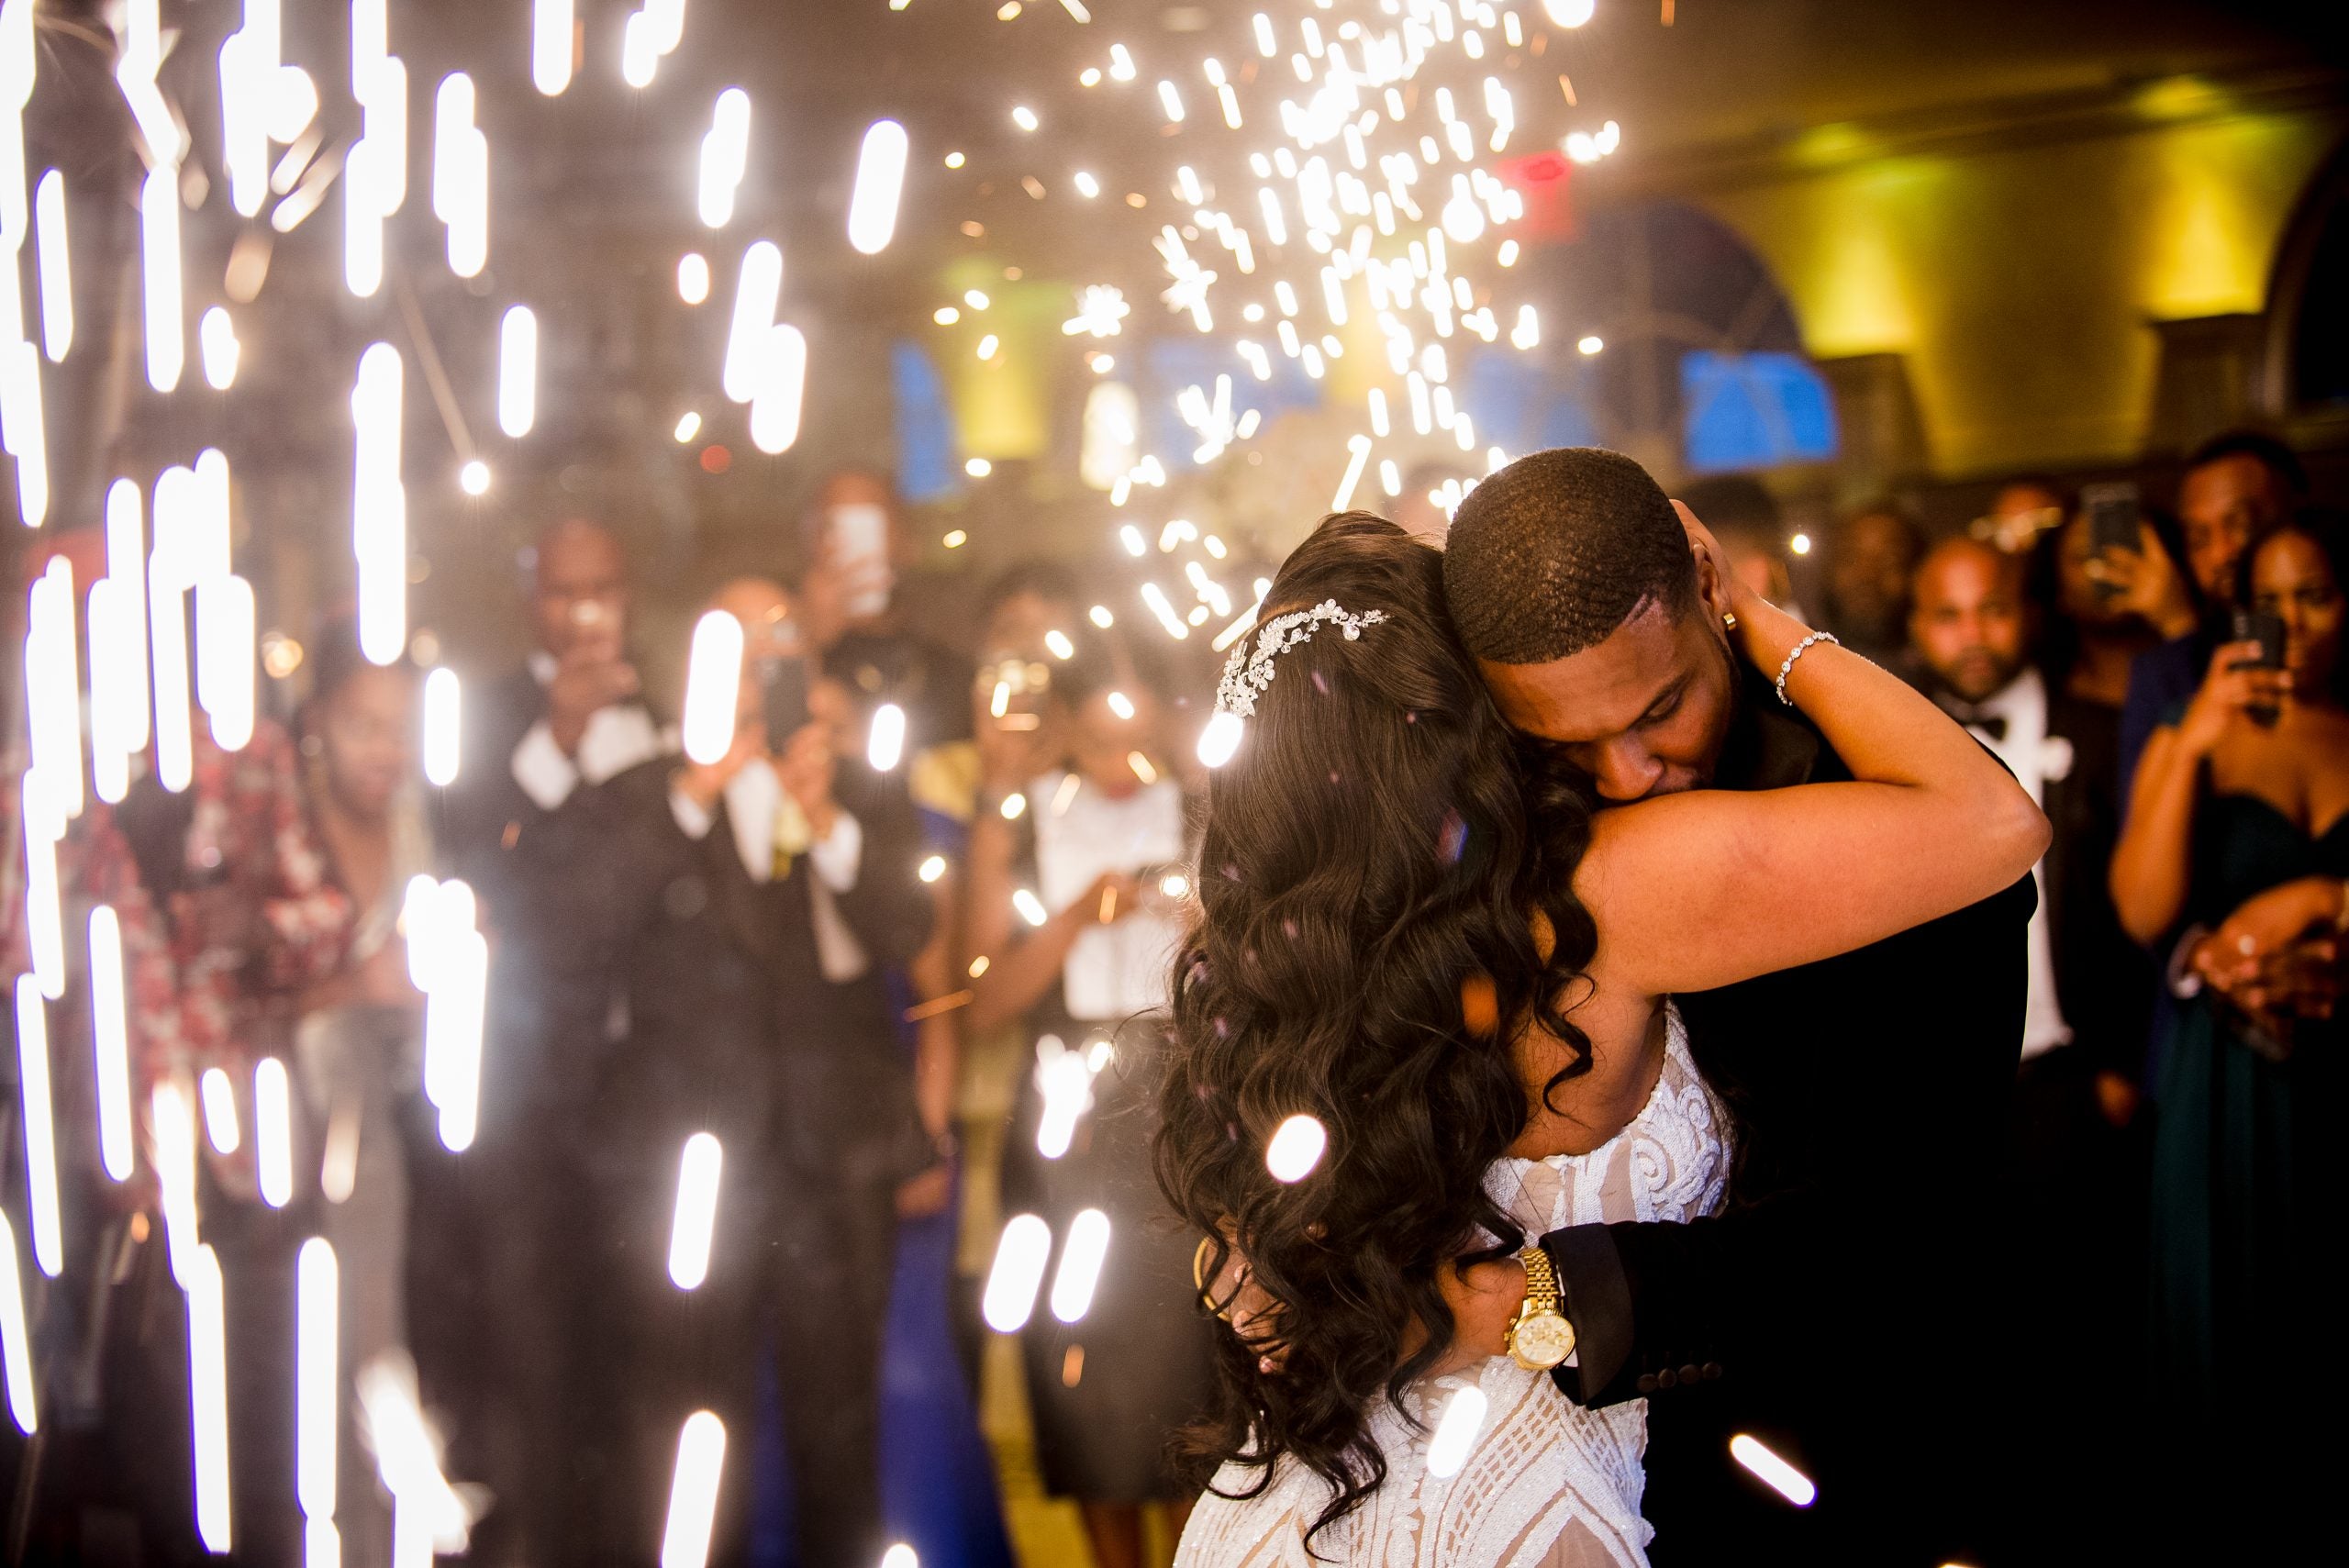 Bridal Bliss: Please Give Ayesha and Steven An Award For This Glam Wedding Affair